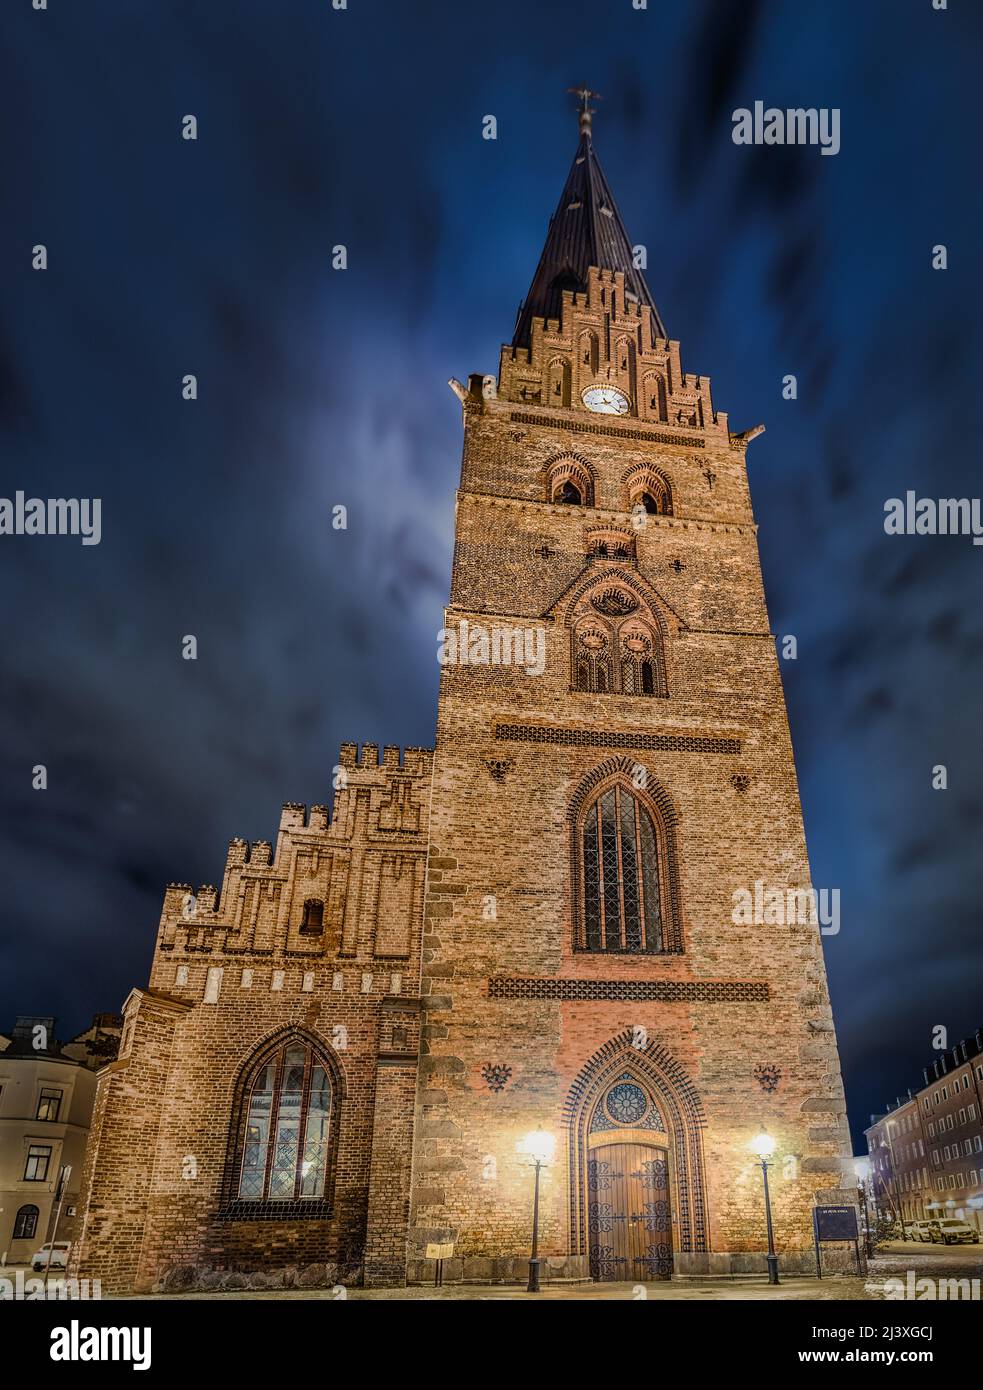 St. Peter's Church (Sankt Petri kyrka) at night. Oldest church in Malmö, 14th century Brick Gothic style, Sweden Stock Photo